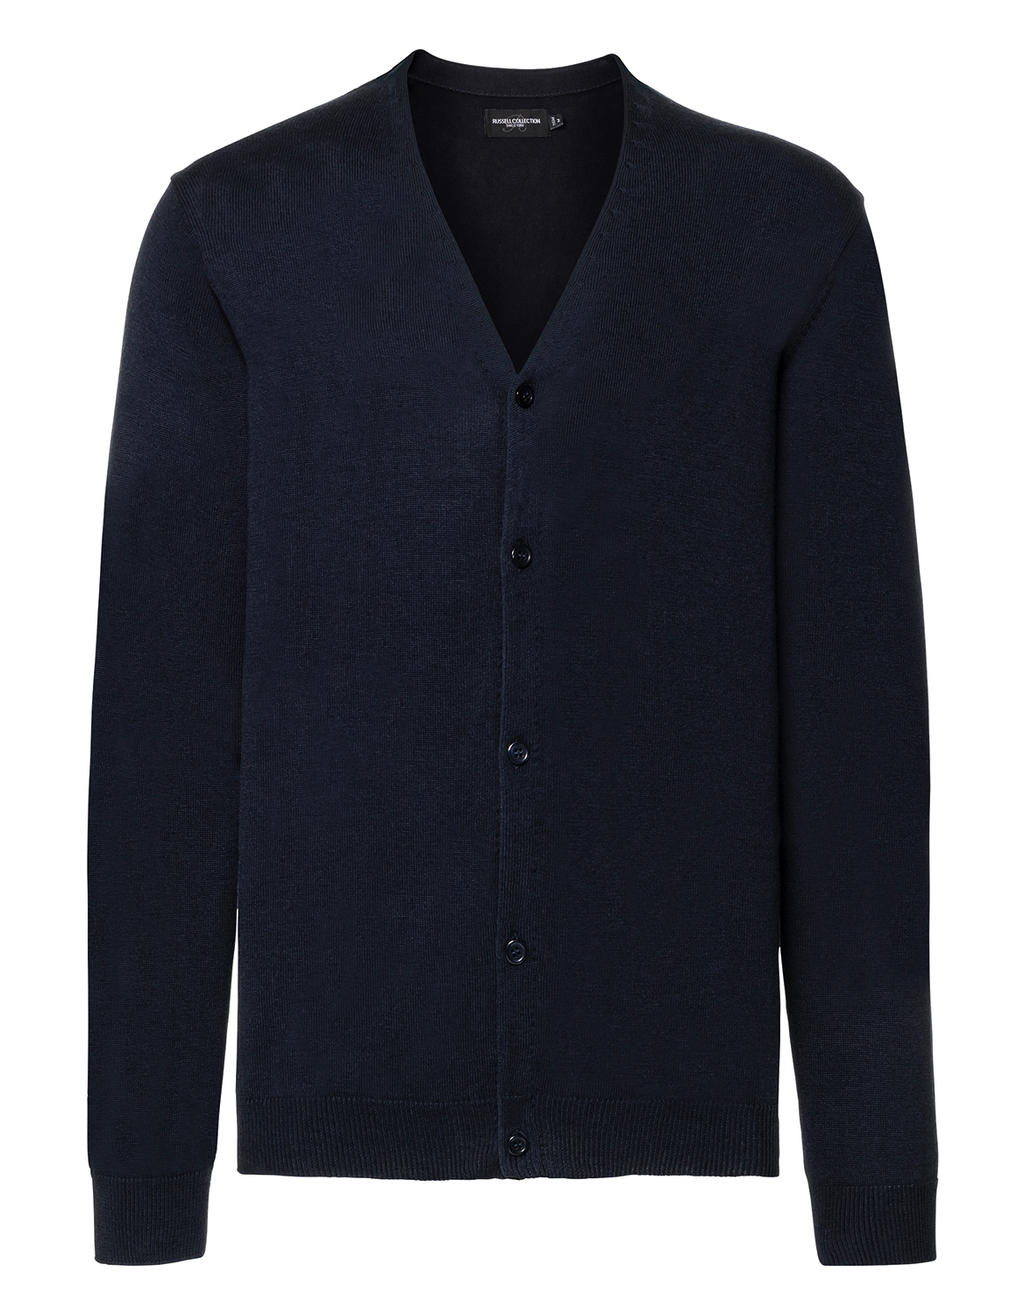  Mens V-Neck Knitted Cardigan in Farbe French Navy